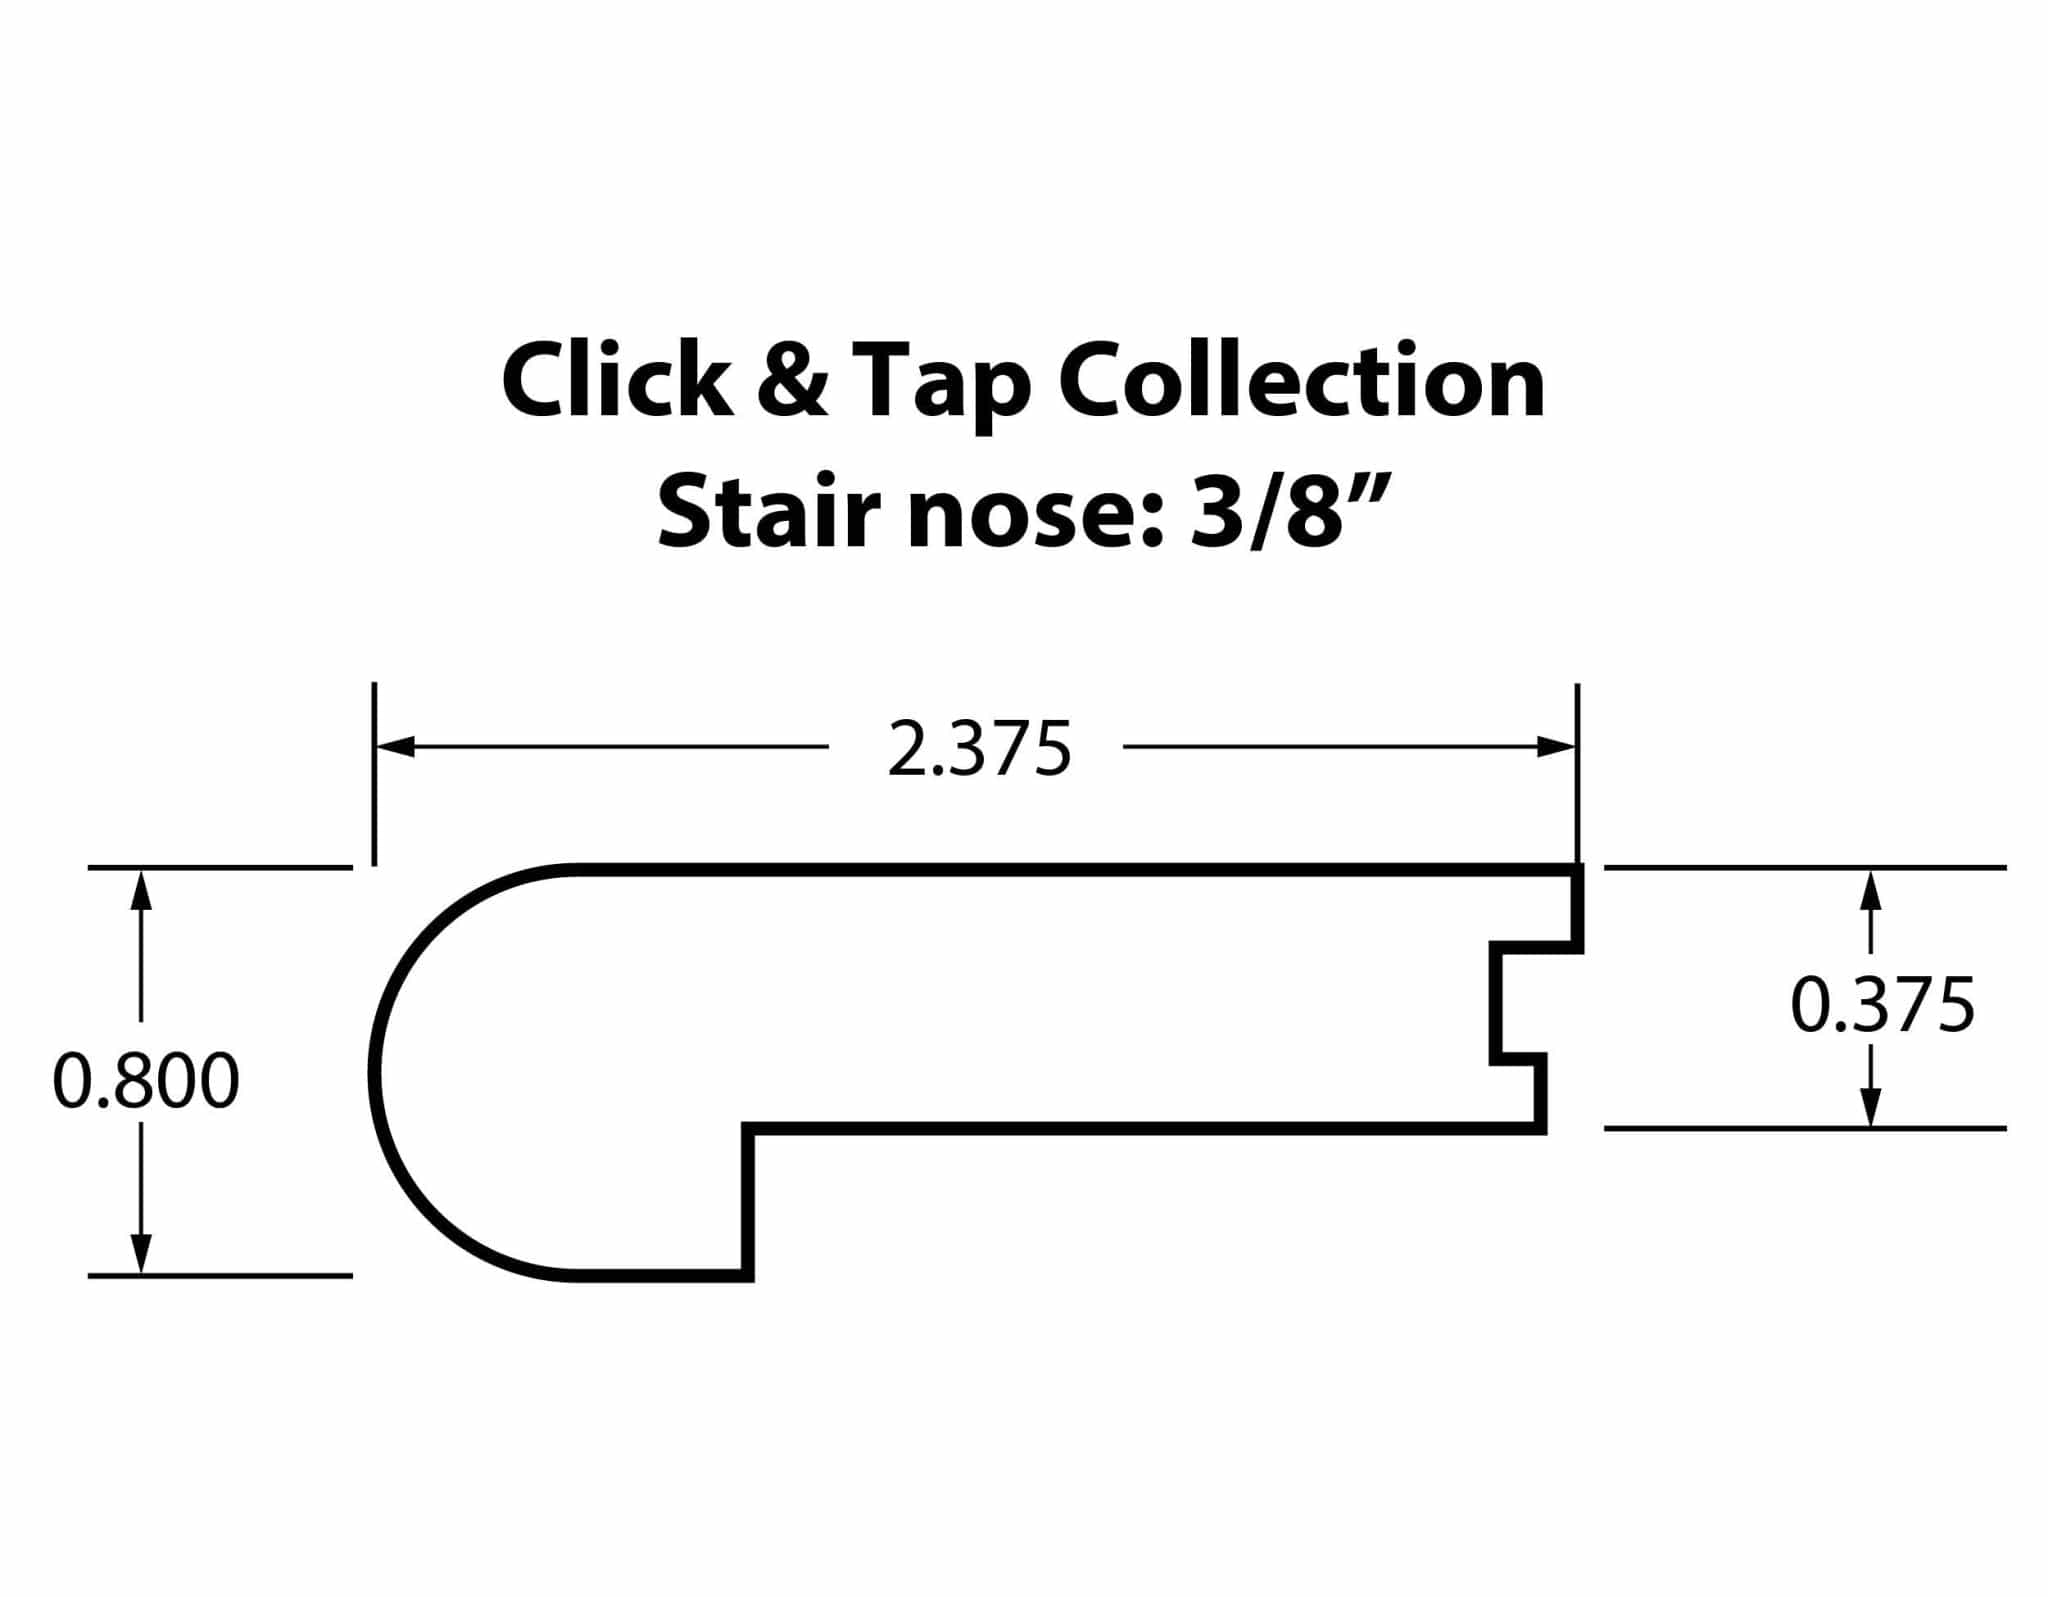 FTFCTRBSN Precision Molding Riverbank White Oak 3/8&quot;  Flush Stair Nose Moldings for the Click &amp; Tap Collection